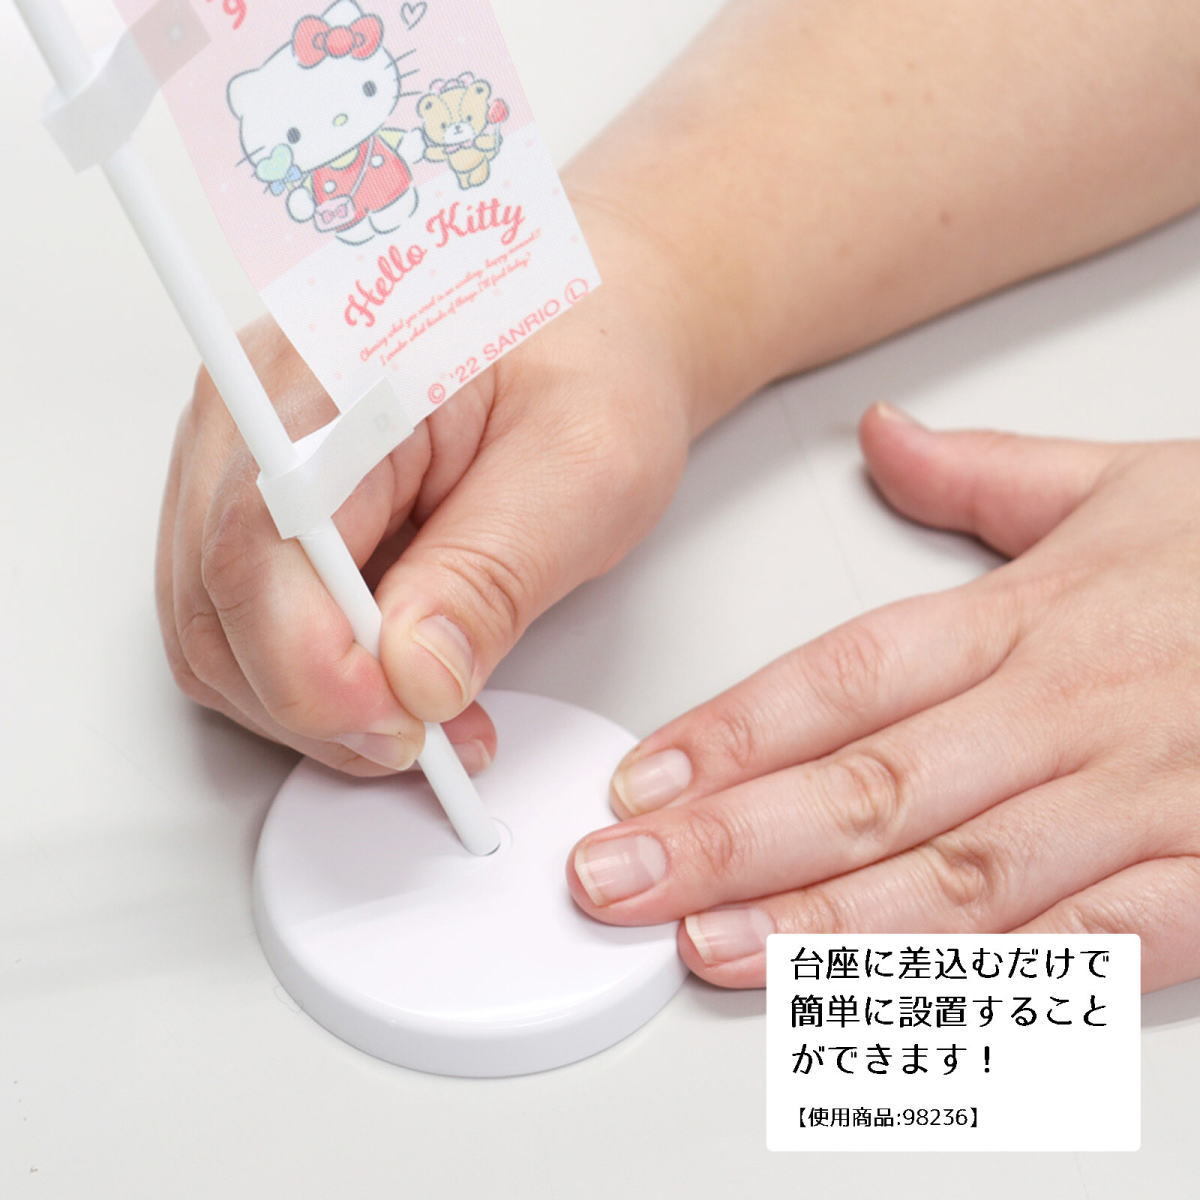  desk . put notice Mini nobori Sanrio cos/ Hello Kitty .. middle out putting out fpi-98238